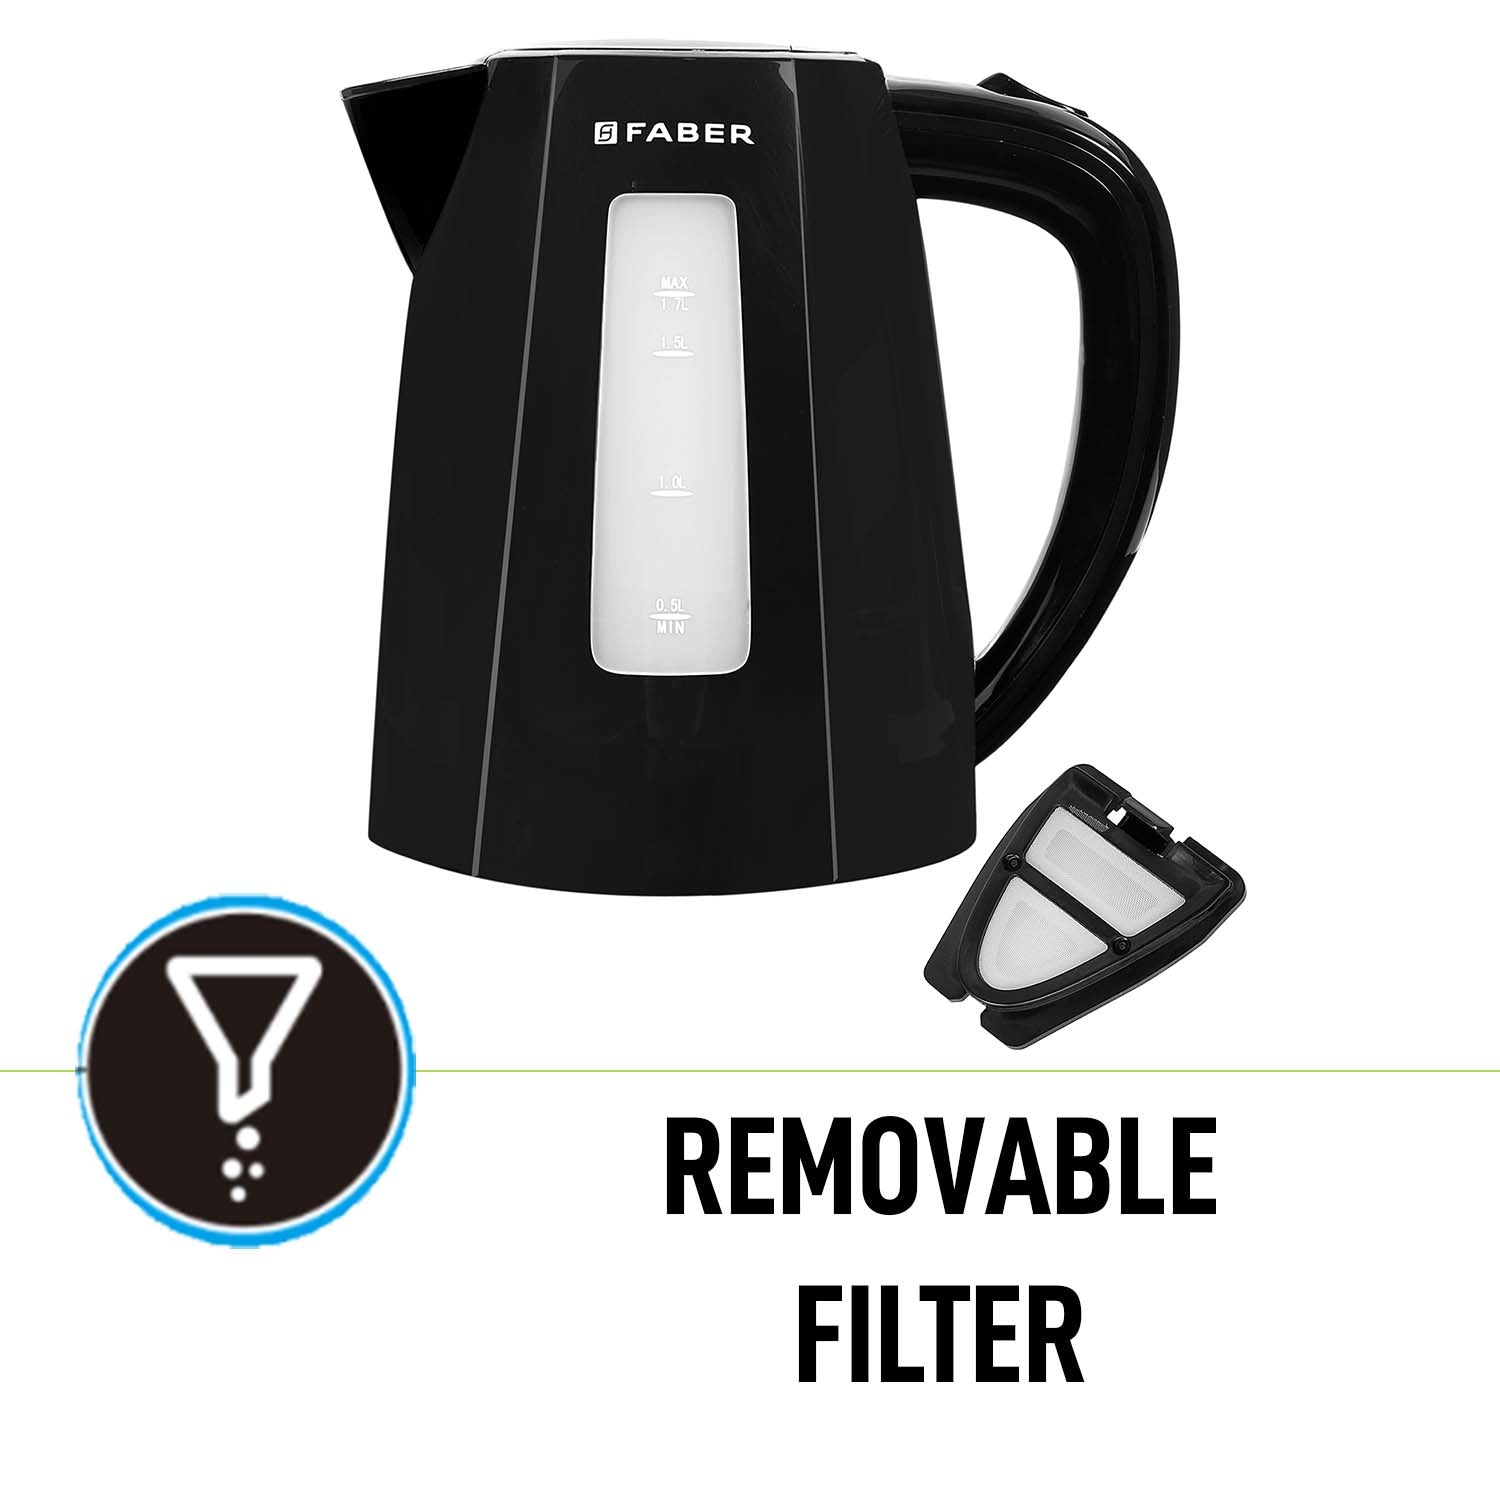 cordless electric kettles: Cordless Electric Kettles - Your go-to